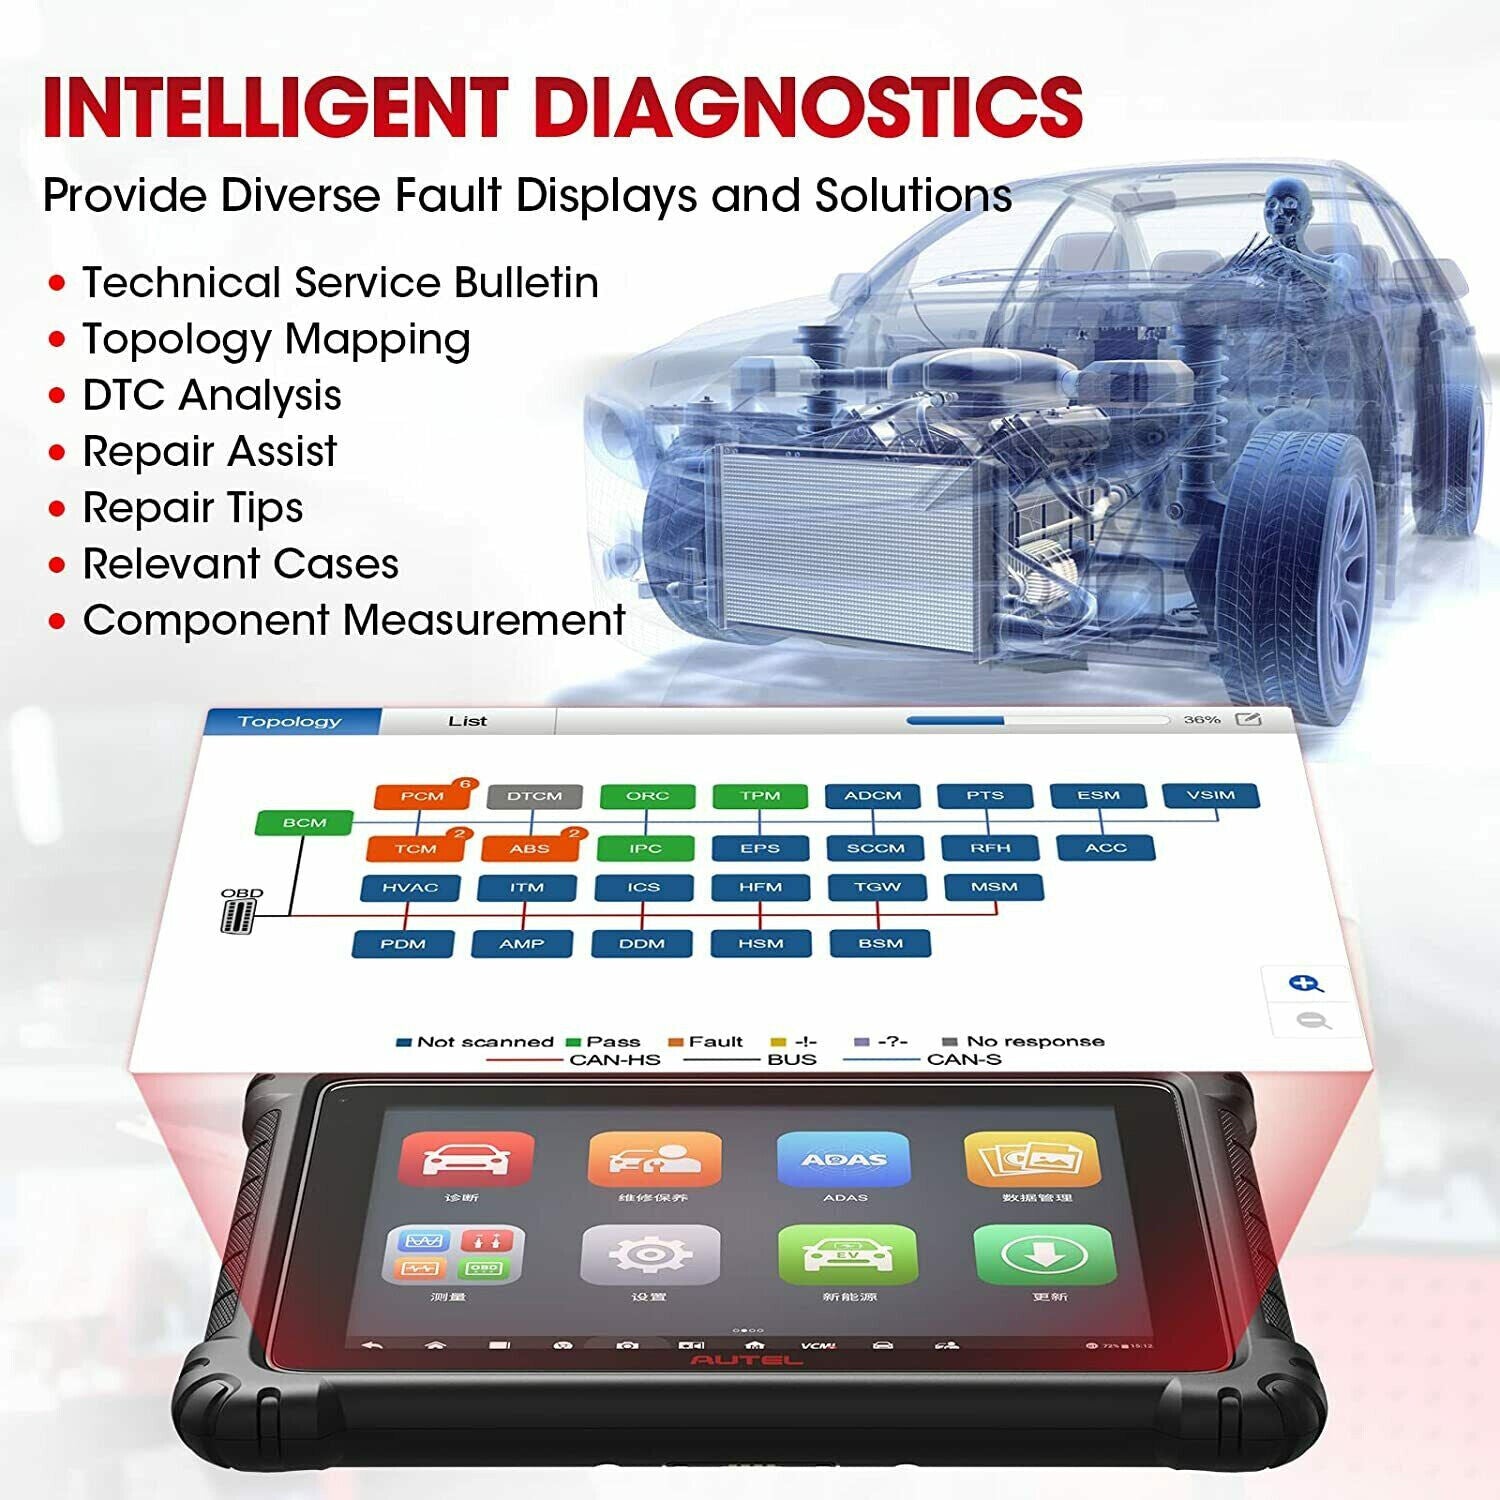 Autel Intelligent Diagnostic tool maxisys ultra with topology mapping and component measurement functions